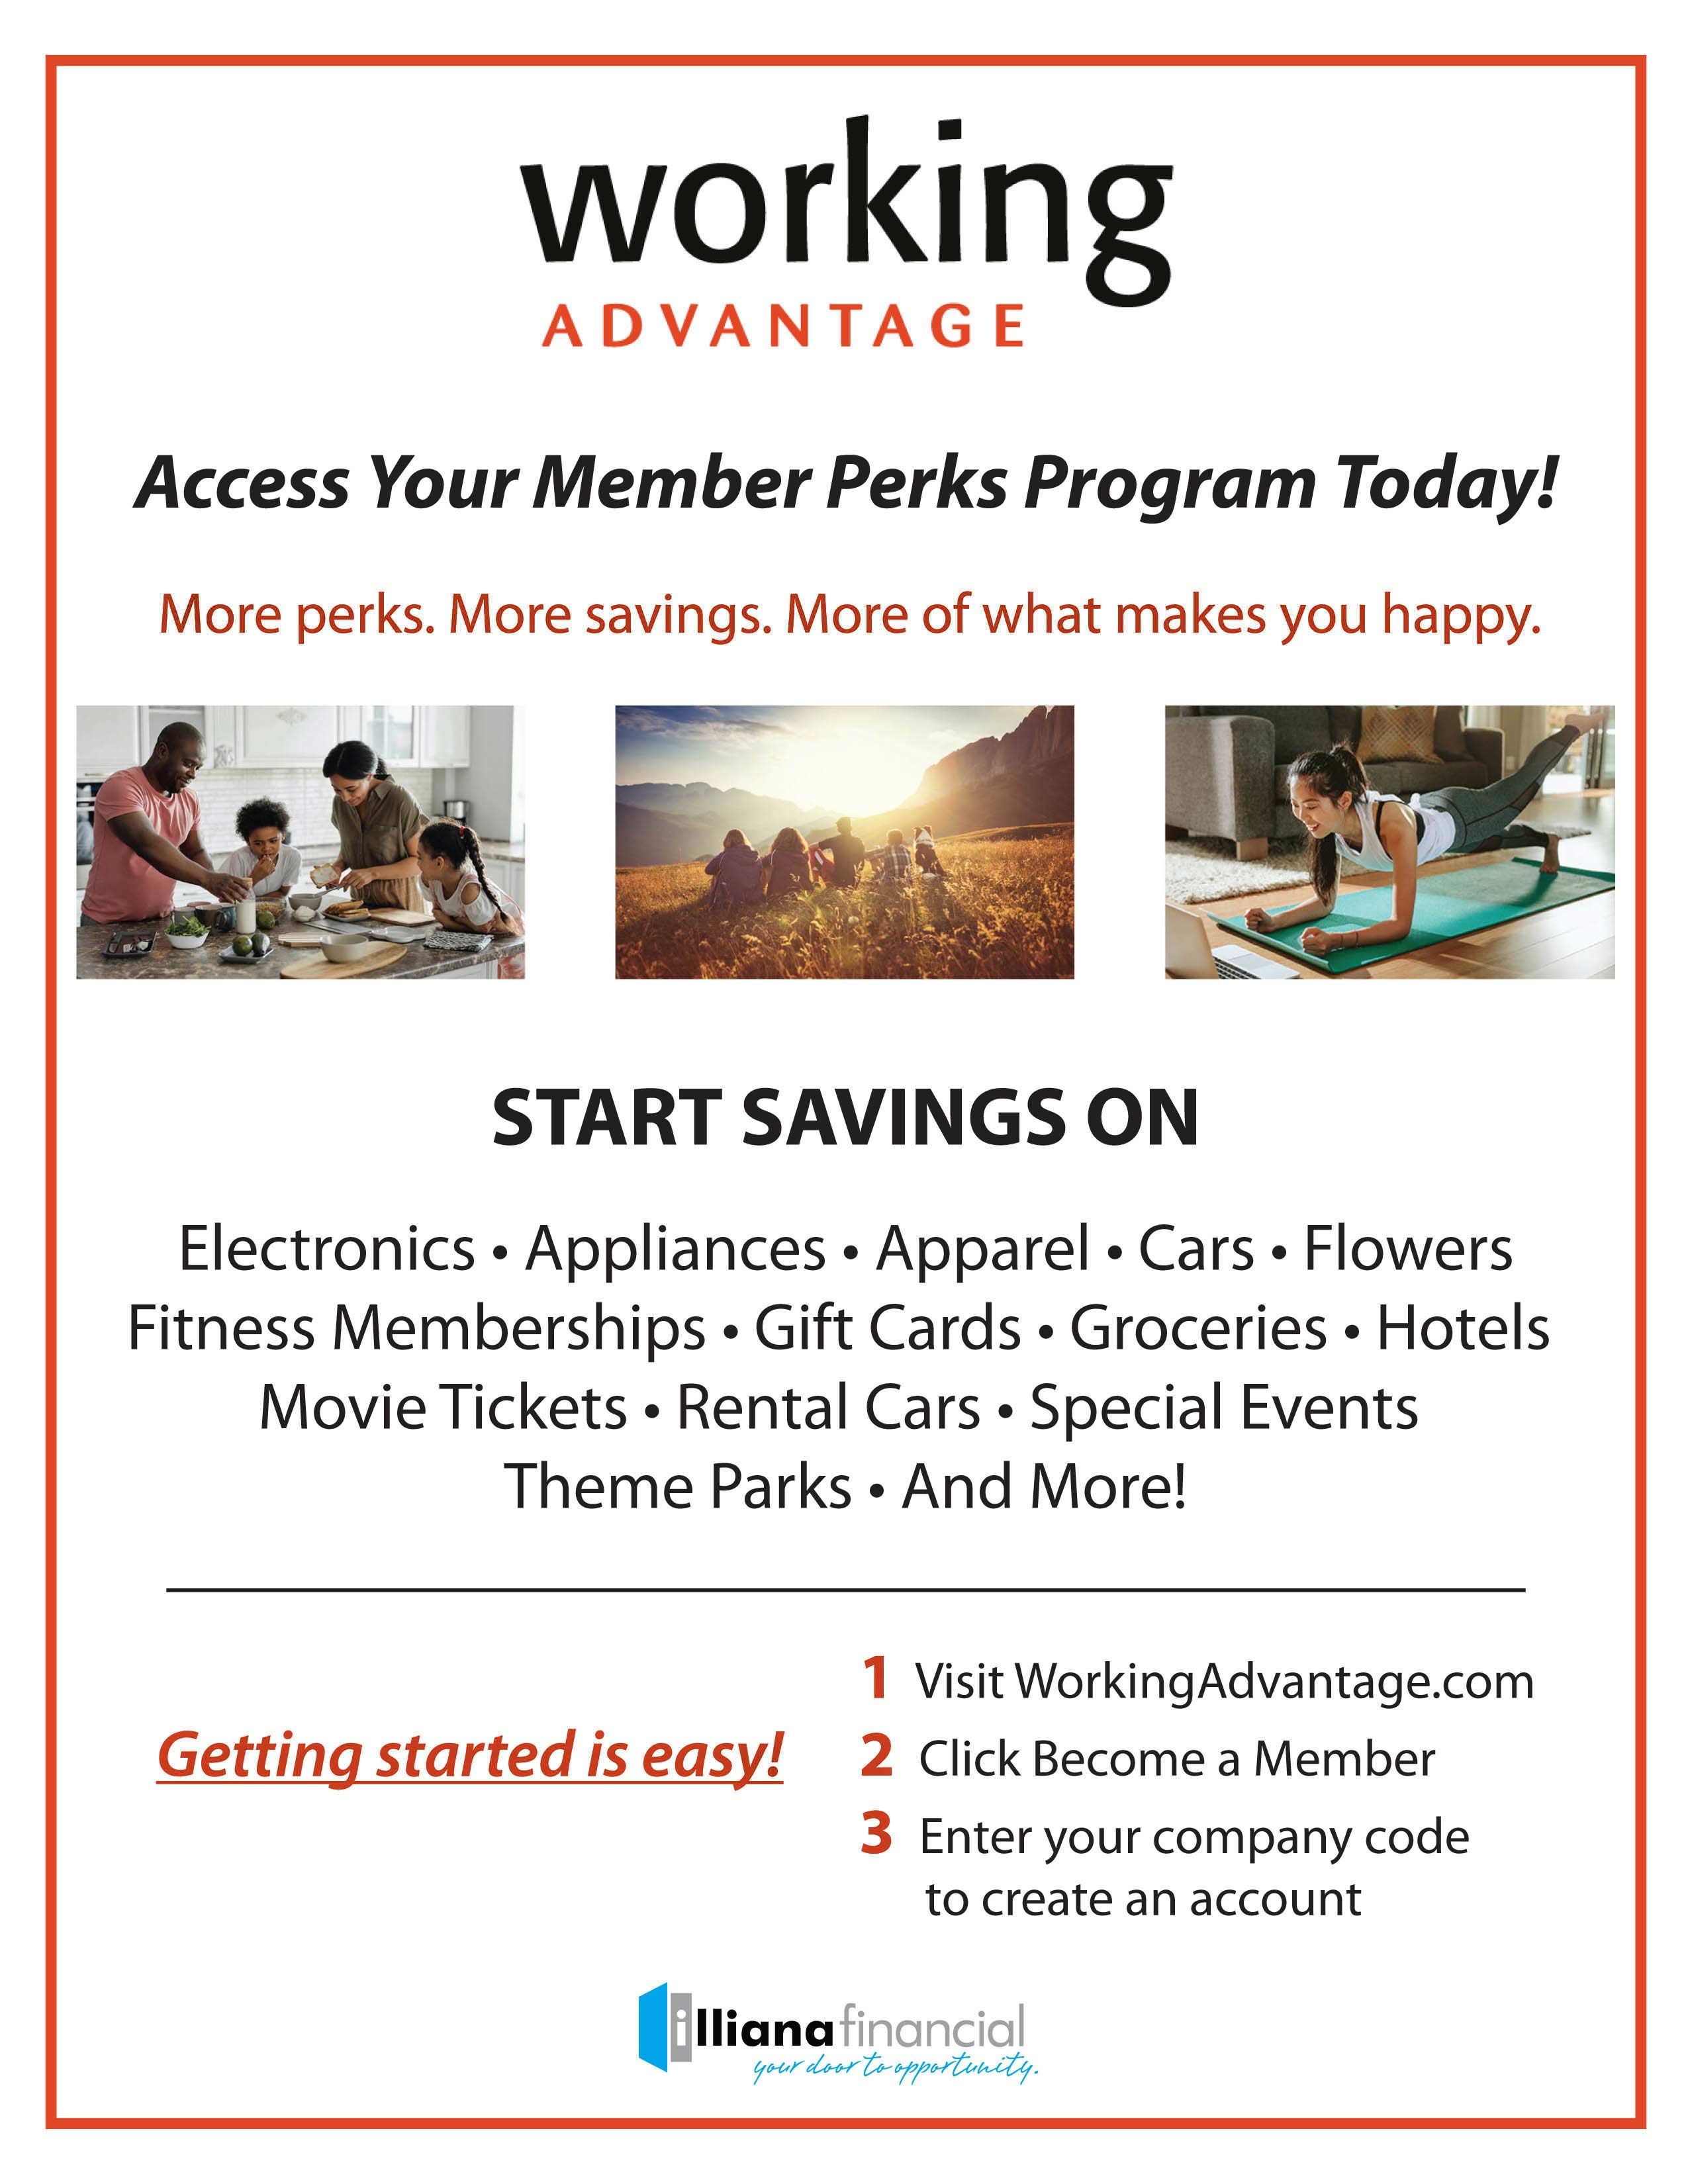 Working Advantage Access your member perks program today! more perks. More savings. More of what makes you happy. Start savings on electronics, applicances, apparel, cars, flowers fitness memberships, gift cards, groceries, hotels, movie tickets, rental cars, special events, theme parks and more! Getting started is easy! 1 Visit working advantage.com 2 click become a member 3 enter your company code to create an account